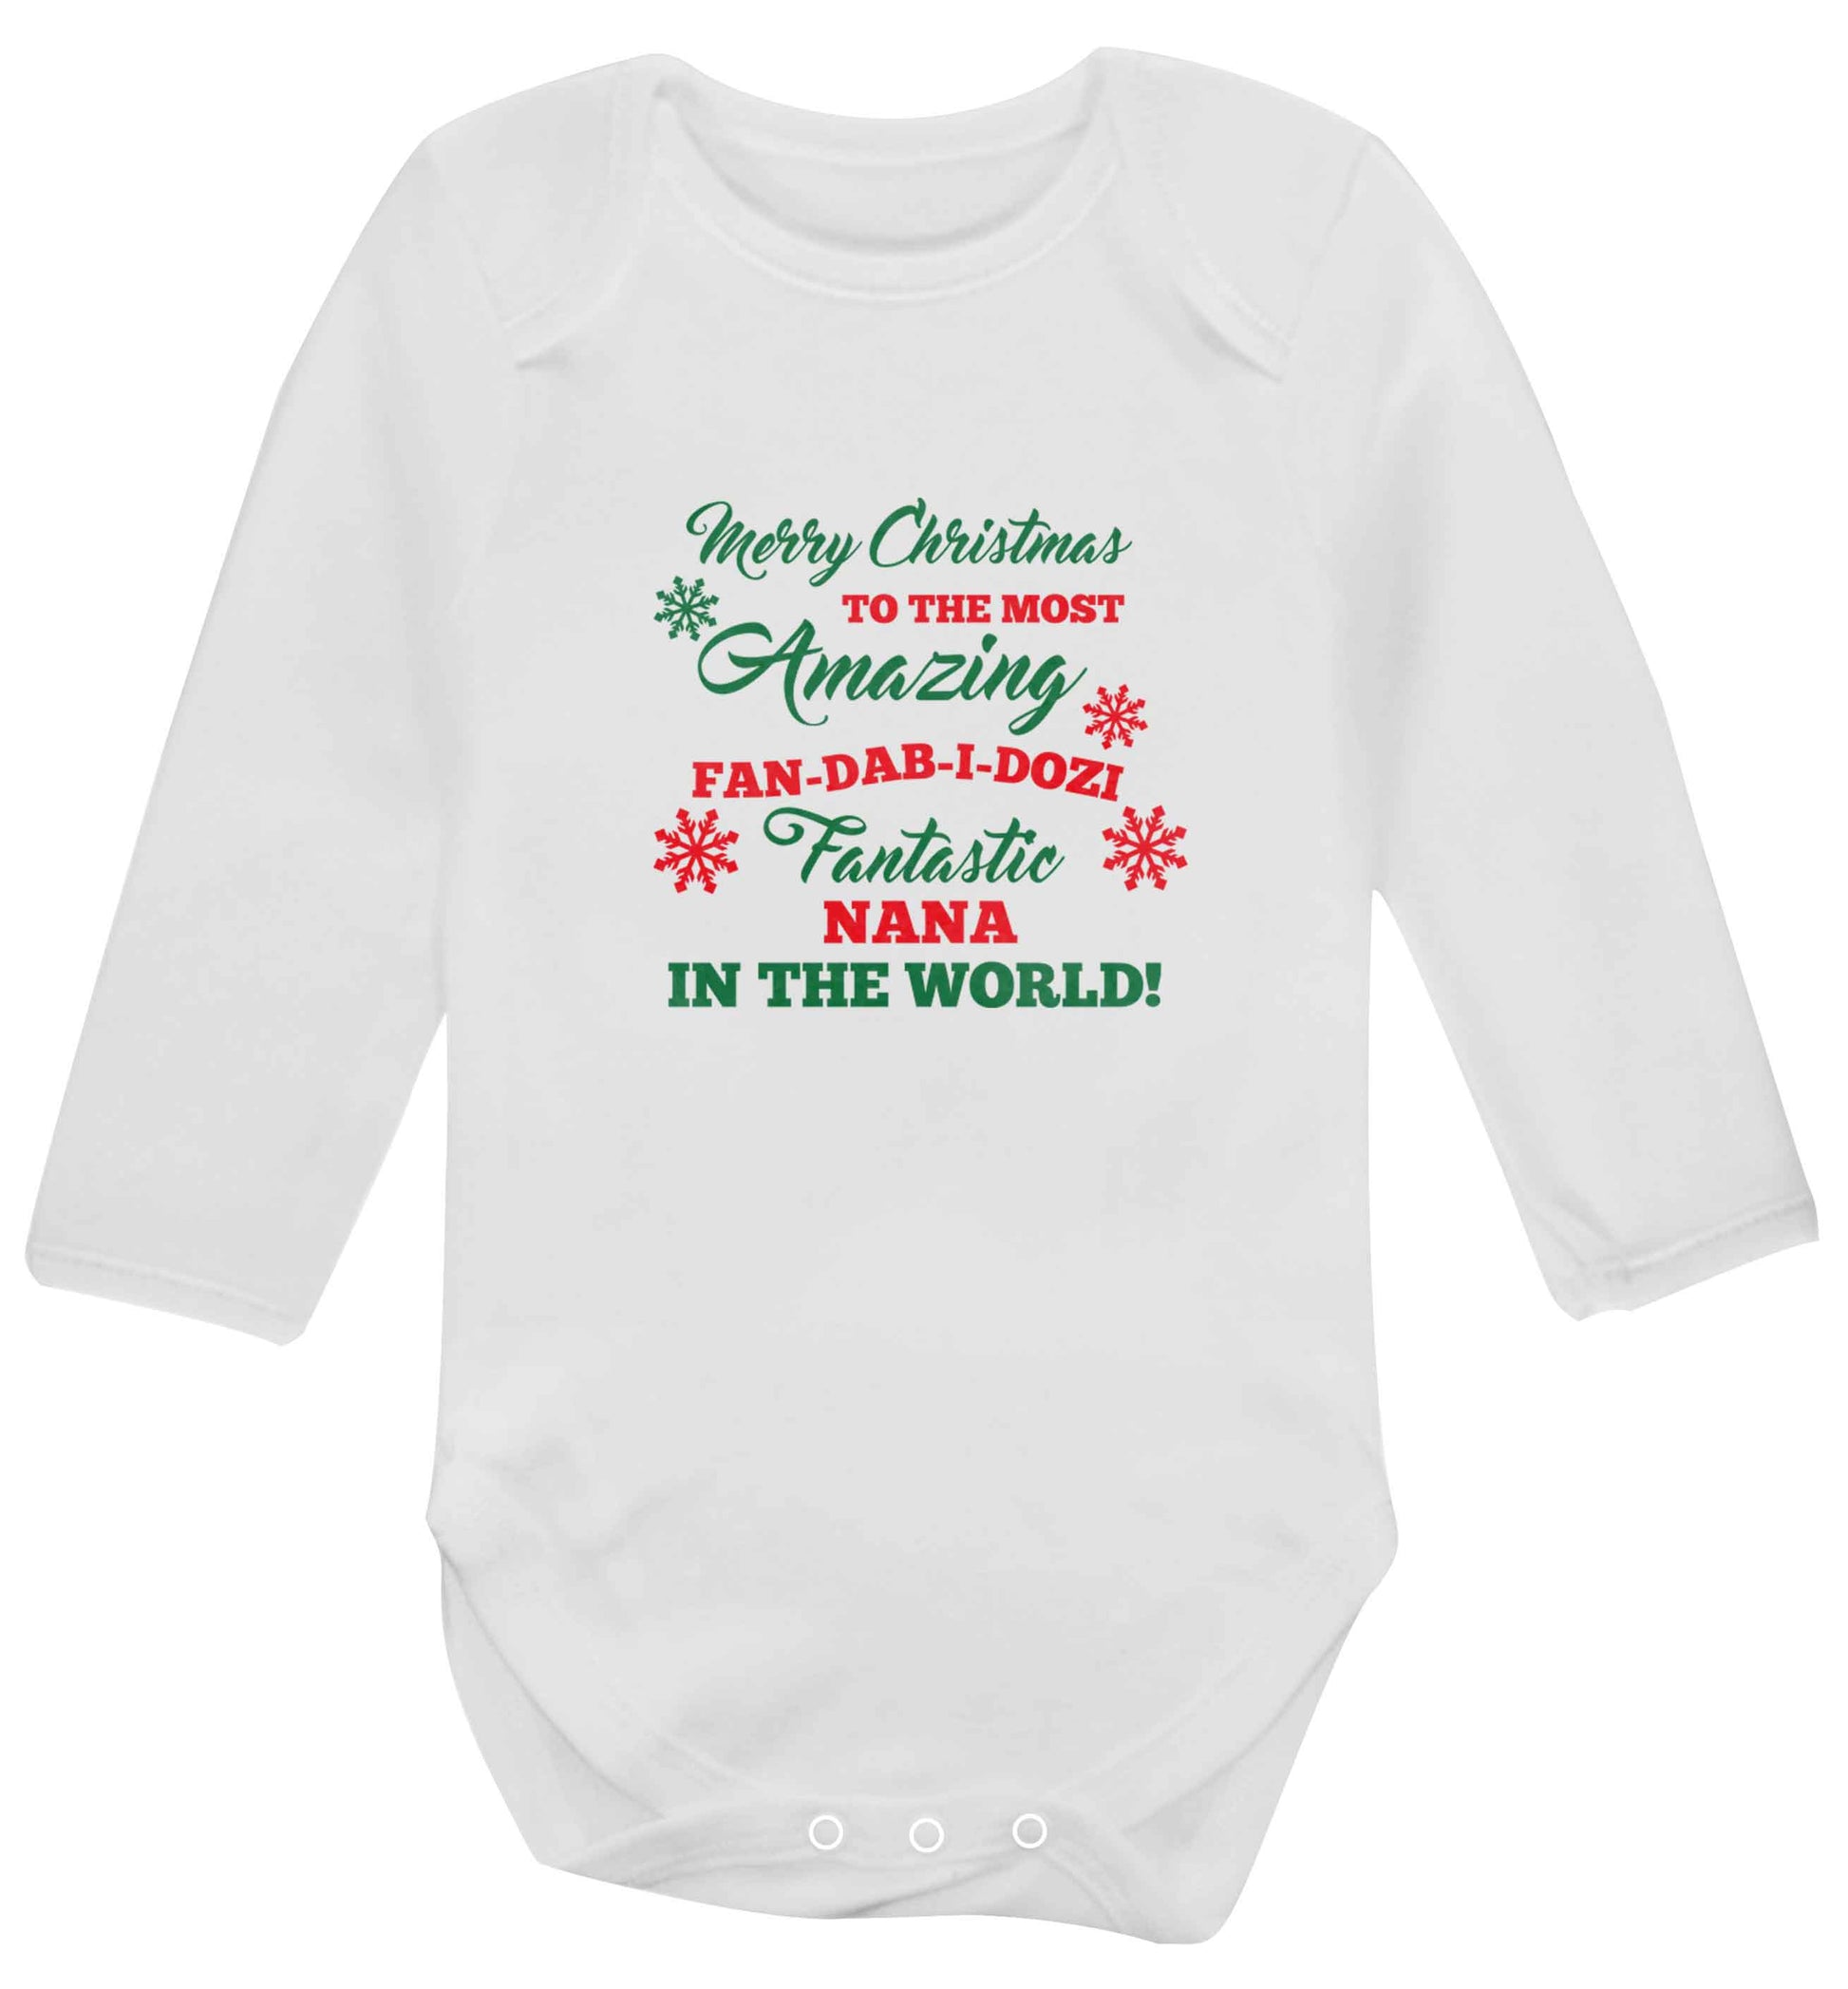 Merry Christmas to the most amazing fan-dab-i-dozi fantasic Nana in the world baby vest long sleeved white 6-12 months